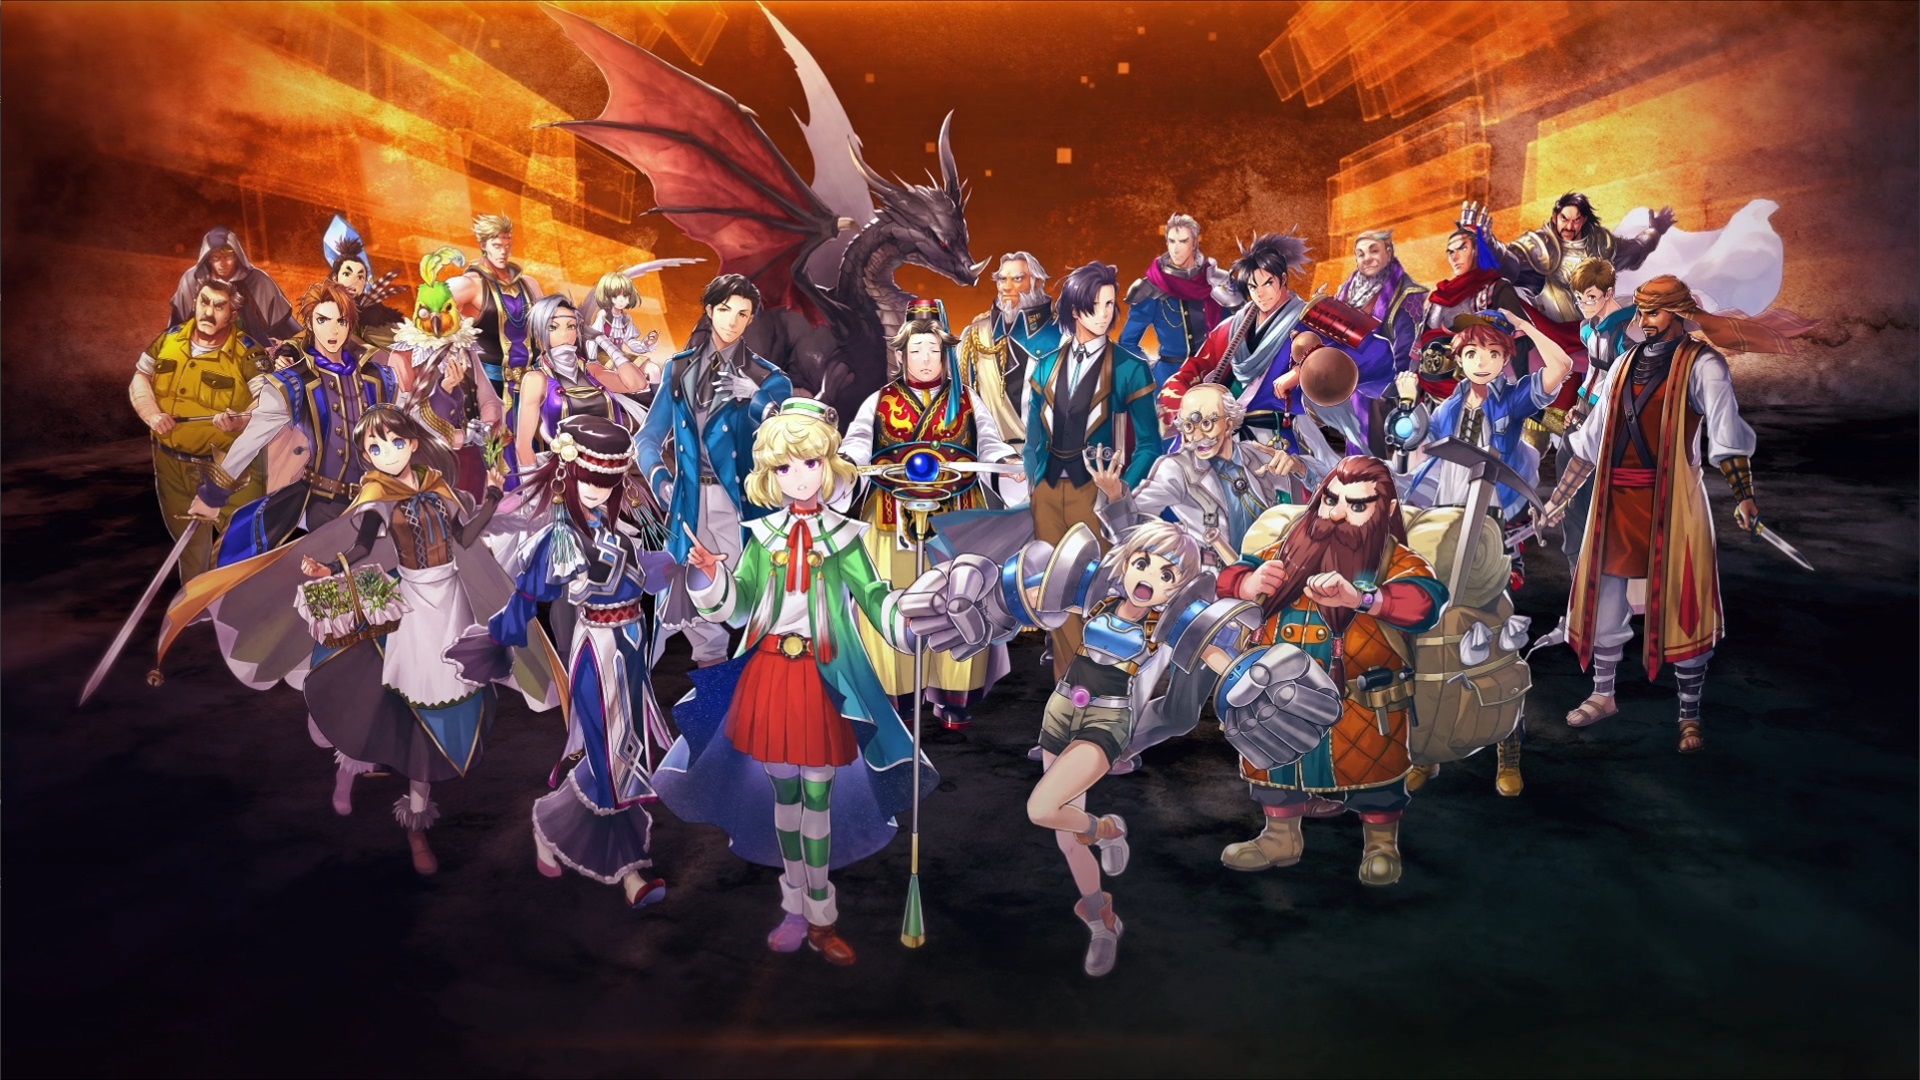 Watch the 6-minute gameplay trailer for indie JRPG Eiyuden Chronicle: Hundred Heroes